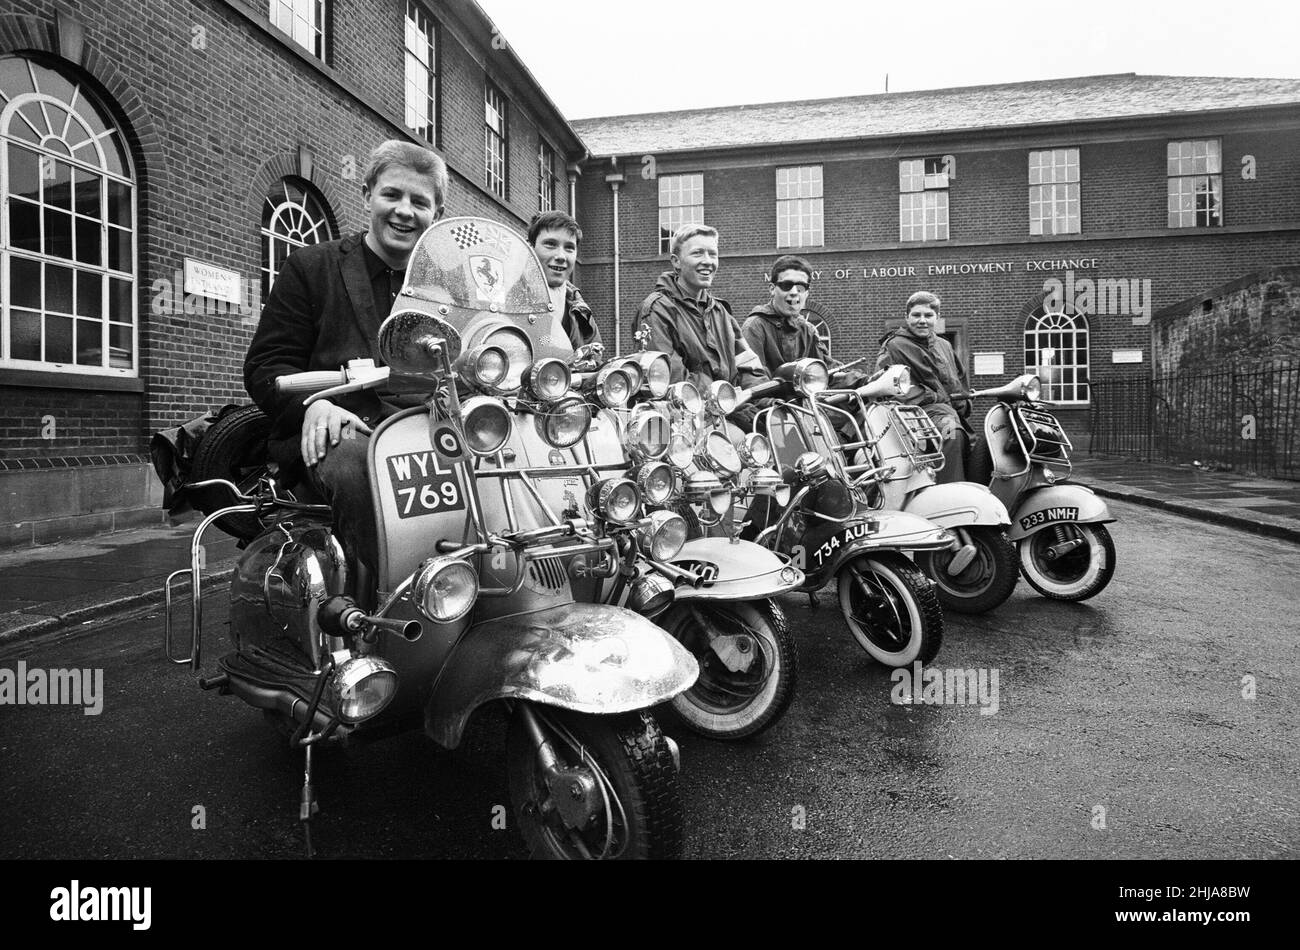 The mods and rockers were two conflicting British youth subcultures of the early to mid-1960s. Media coverage of mods and rockers fighting in 1964 sparked a moral panic about British youths, and the two groups became labelled as folk devils. John Rogers on his scooter with friends in peckham. 6th May 1964. Stock Photo